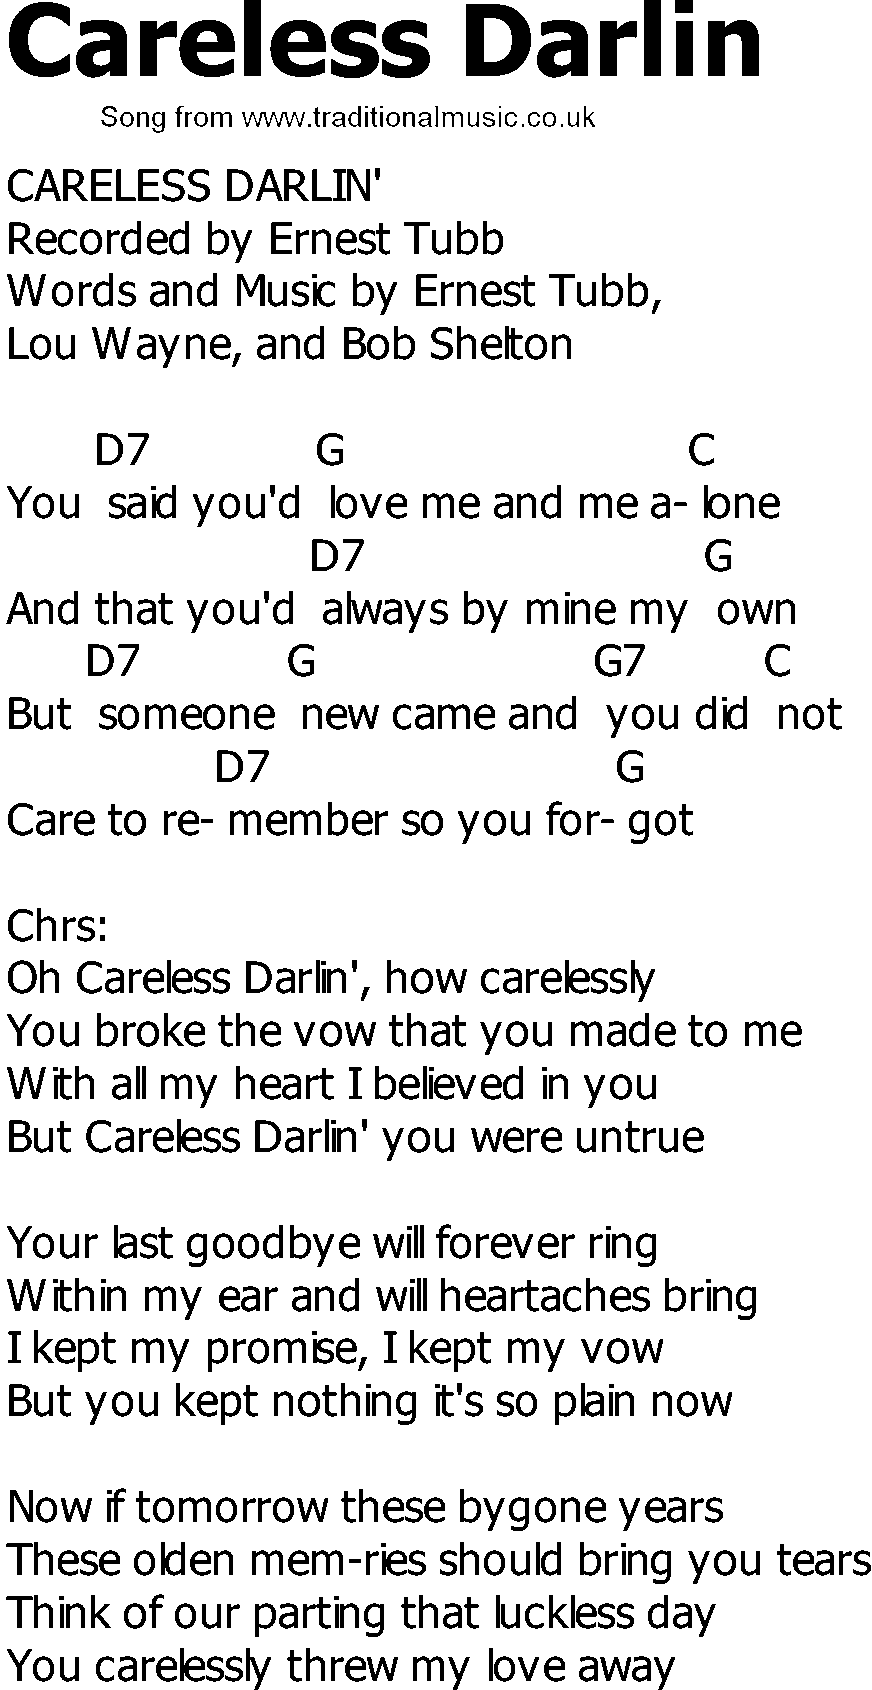 Old Country song lyrics with chords - Careless Darlin